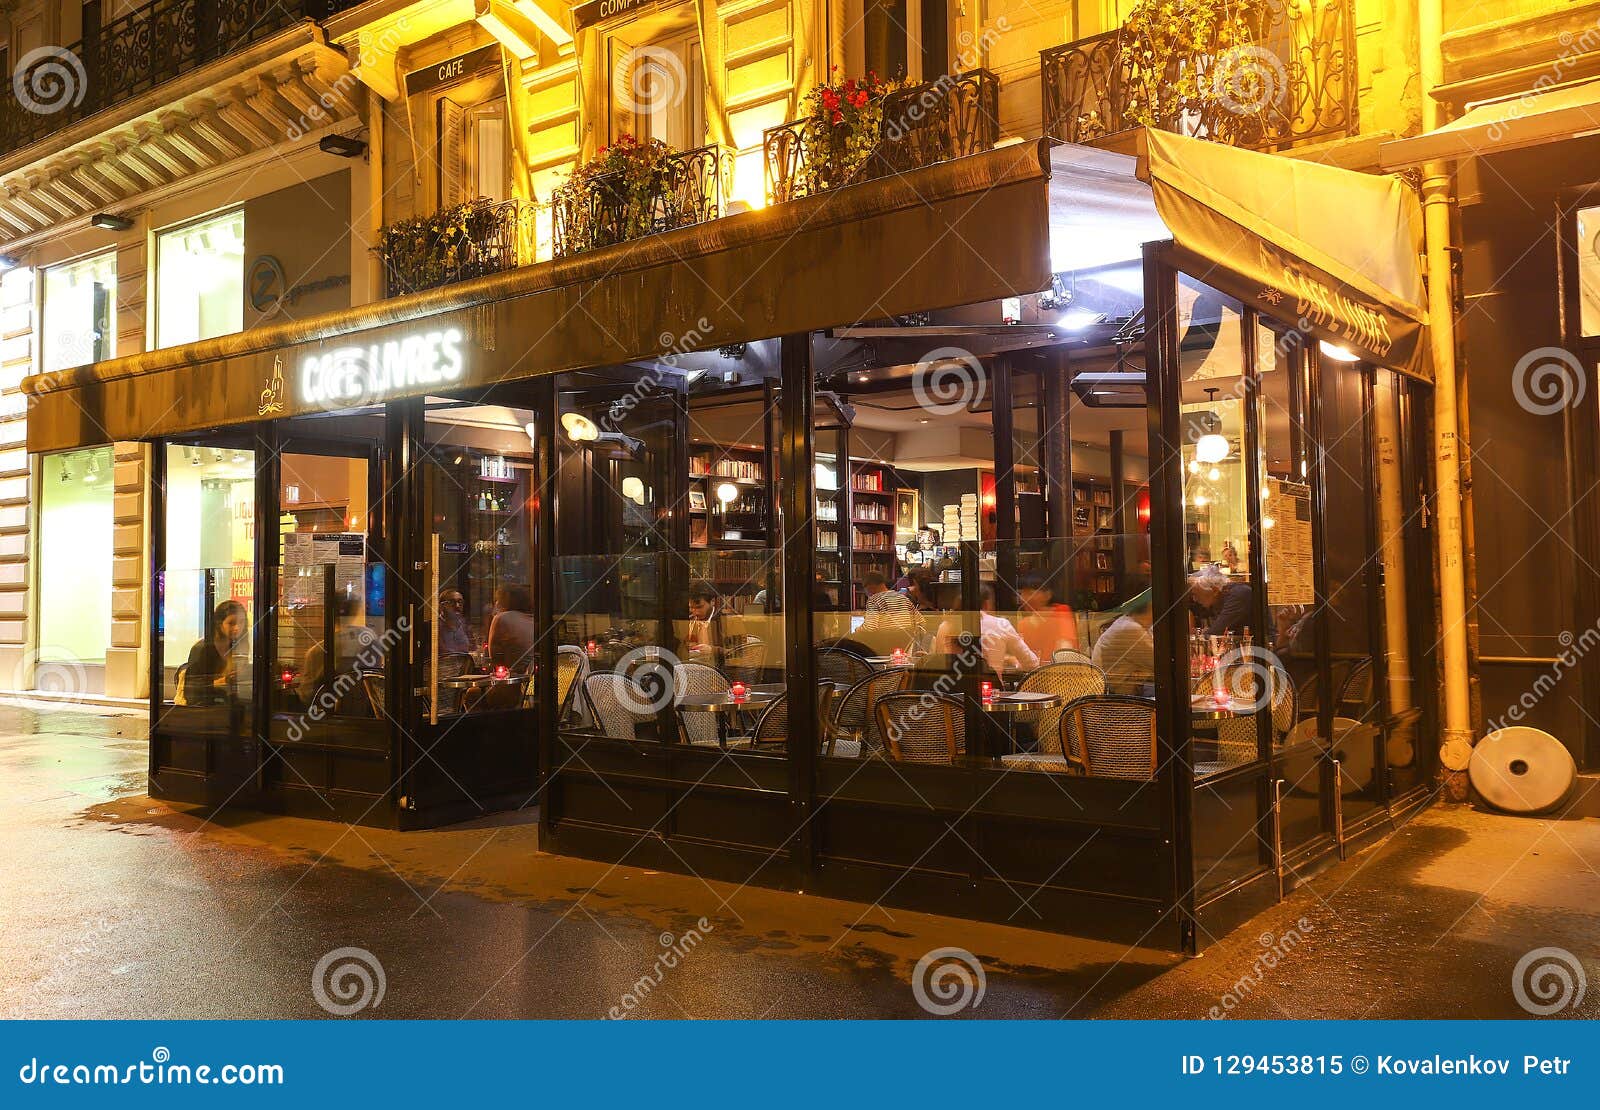 The Famous French Cafe Livres -Books In French Located ...